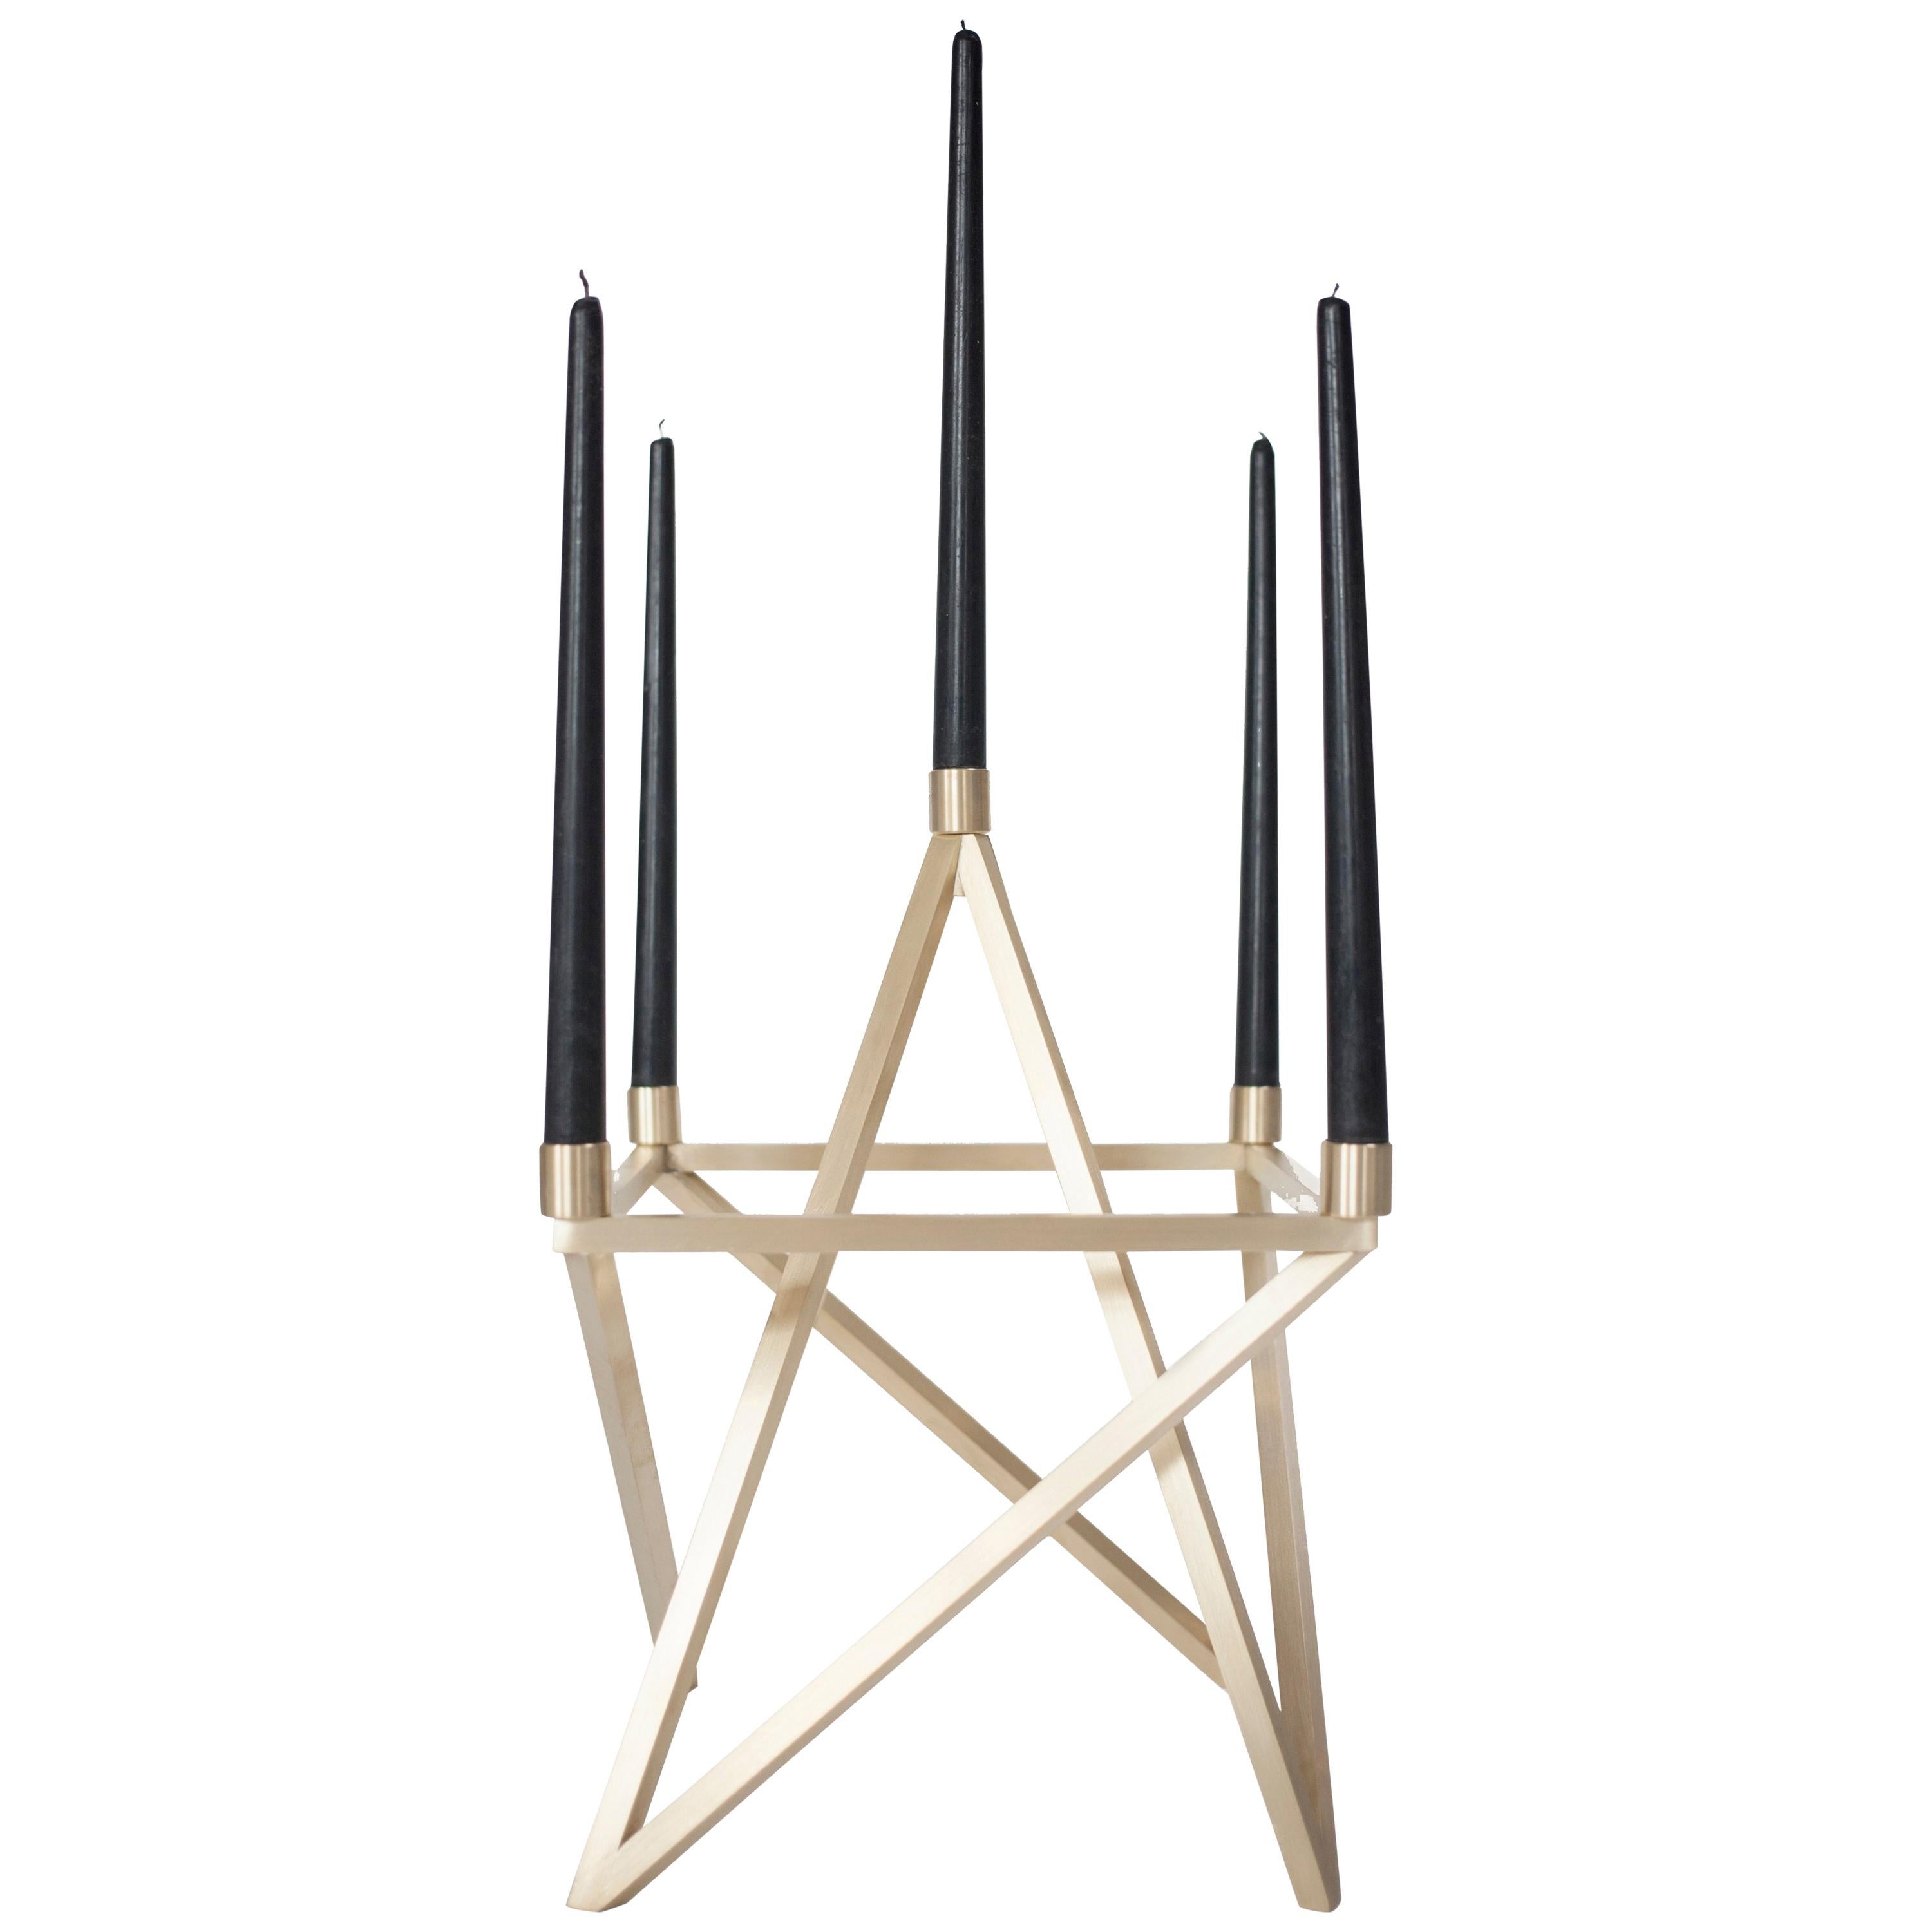 Contemporary 'Pagan' Candelabra by Material Lust, 2014 For Sale